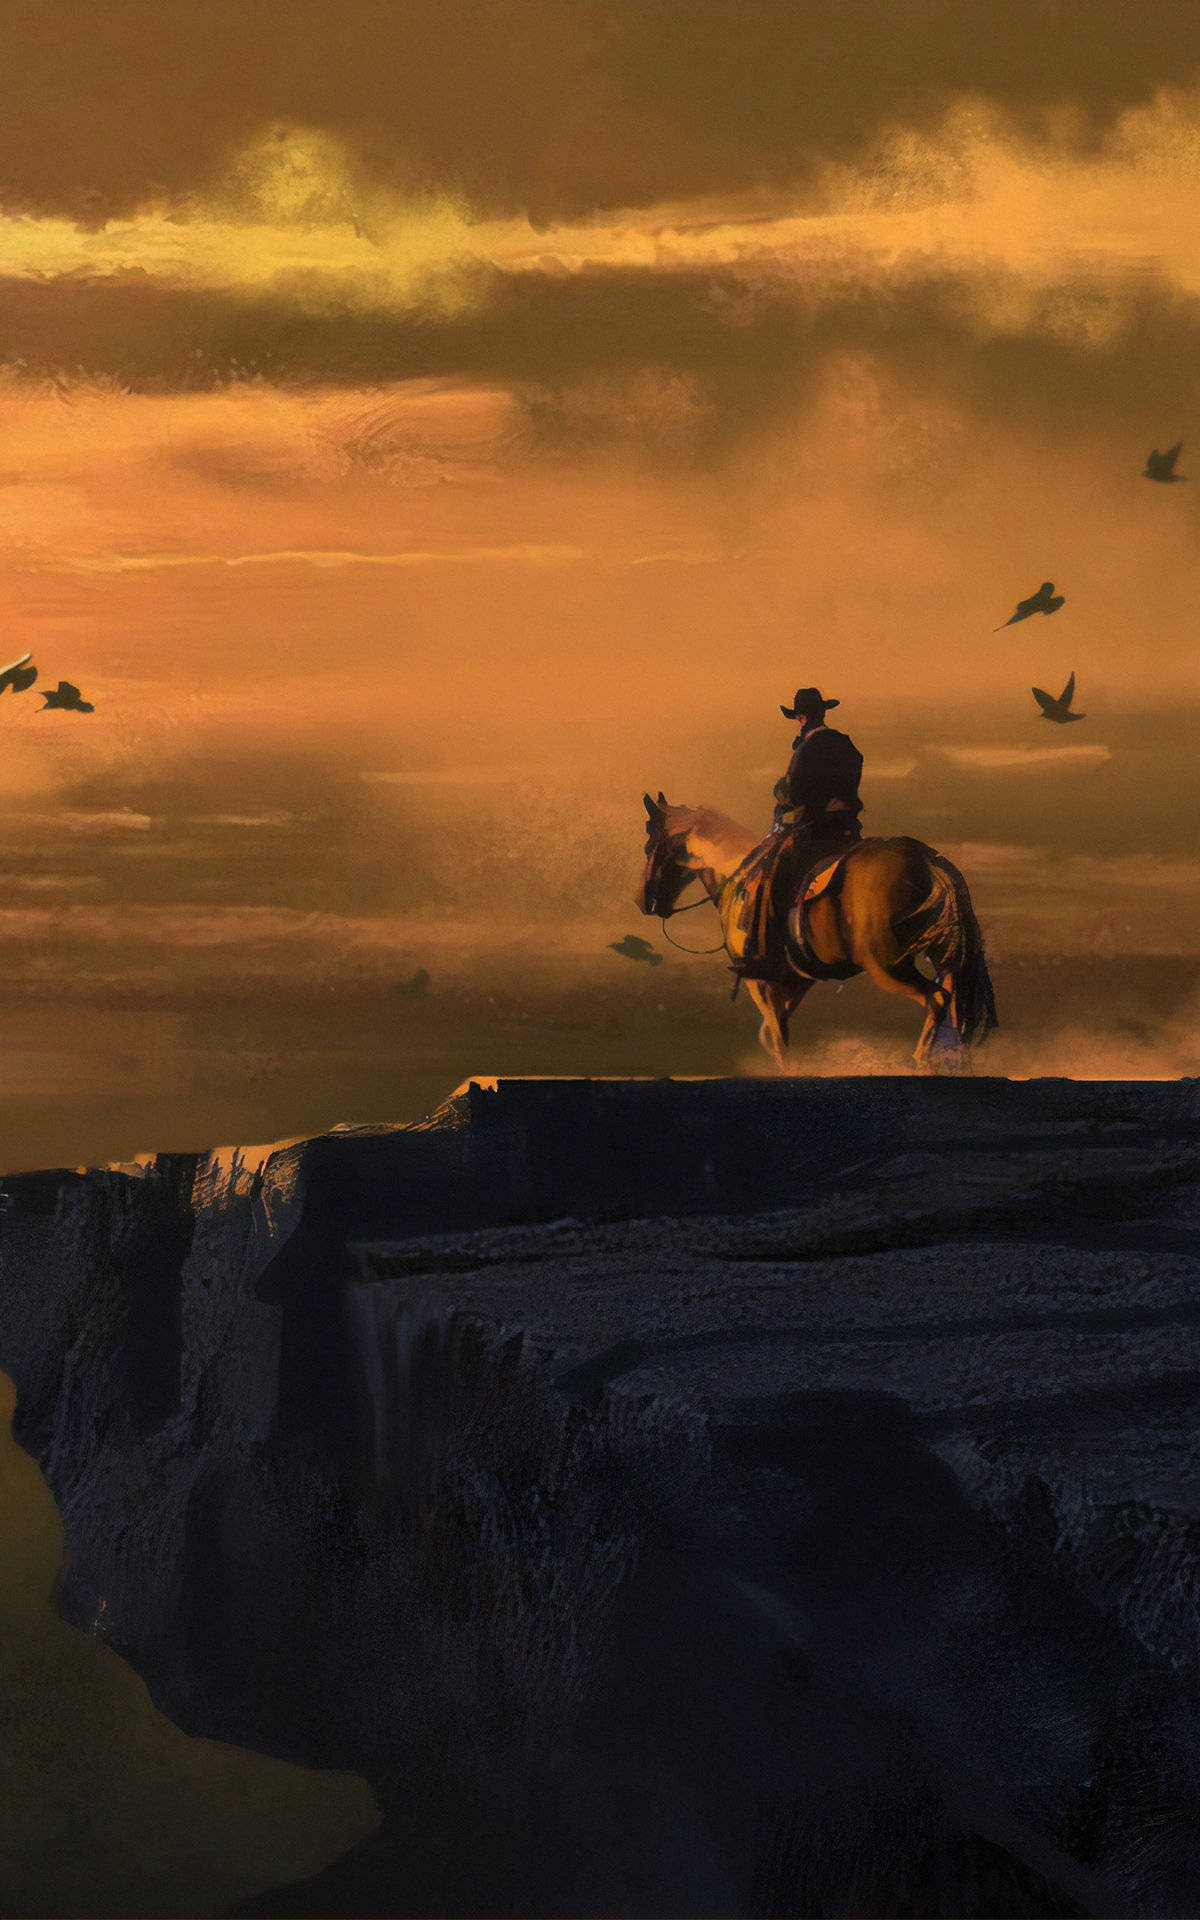 Explore the Wild West aboard your trusty steed in Red Dead Redemption 2. Wallpaper